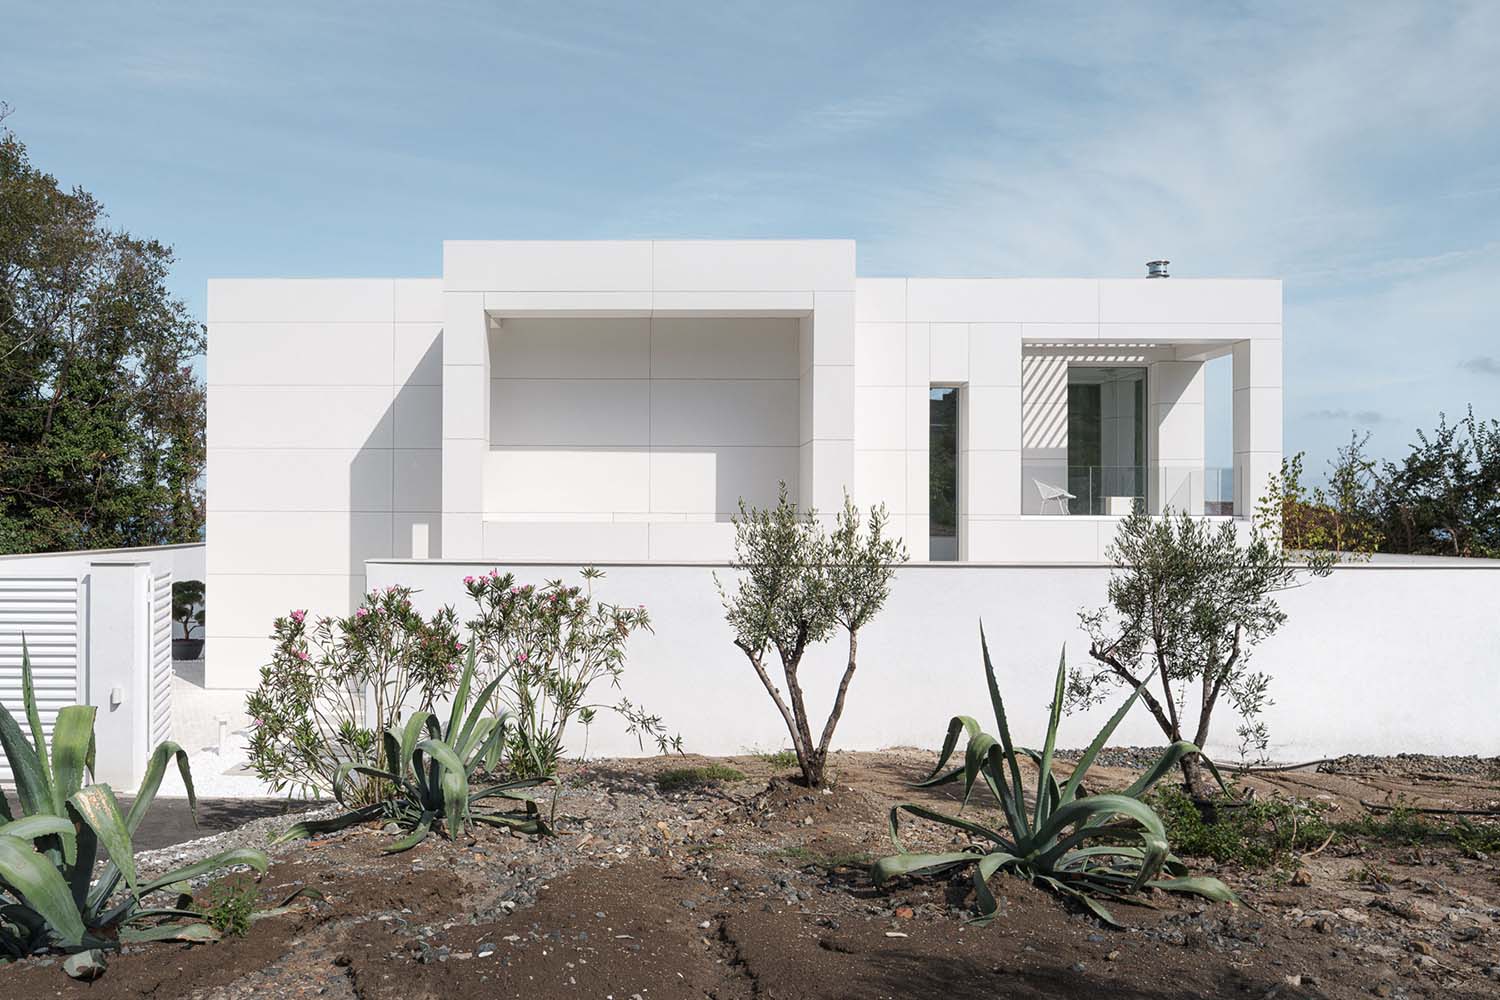 Villa Bianca Private House by Alexander Yonchev-Simple Architecture is Winner in Architecture, Building and Structure Design Category, 2022 - 2023.